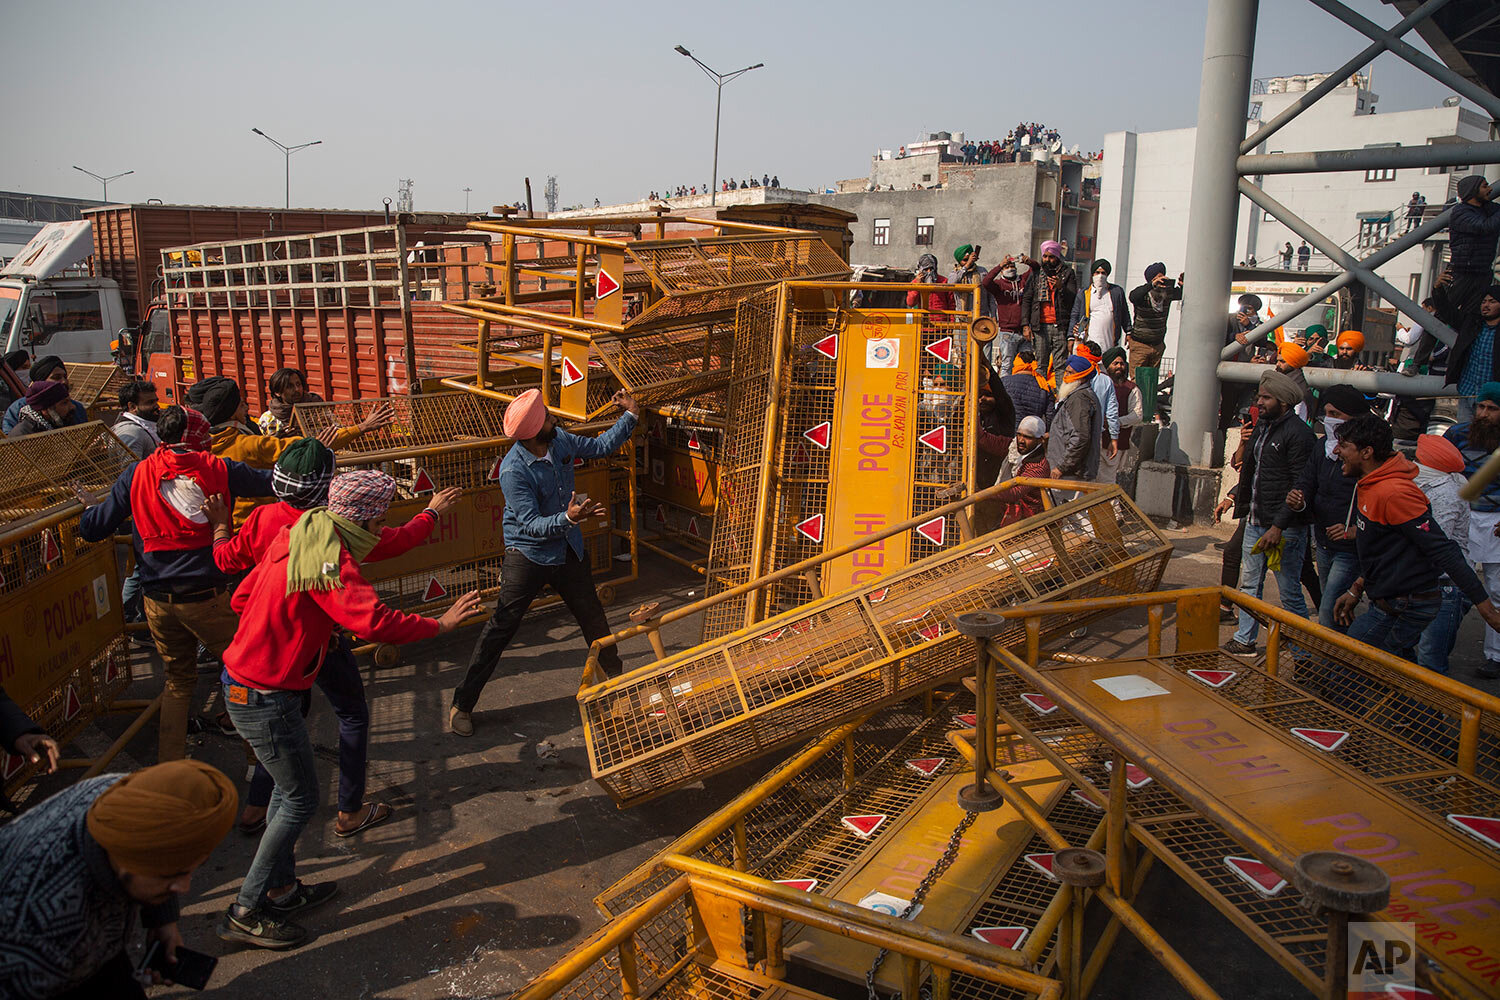  Protesting farmers remove police barricades as they march to the capital during India's Republic Day celebrations in New Delhi, India, Tuesday, Jan. 26, 2021. (AP Photo/Altaf Qadri) 